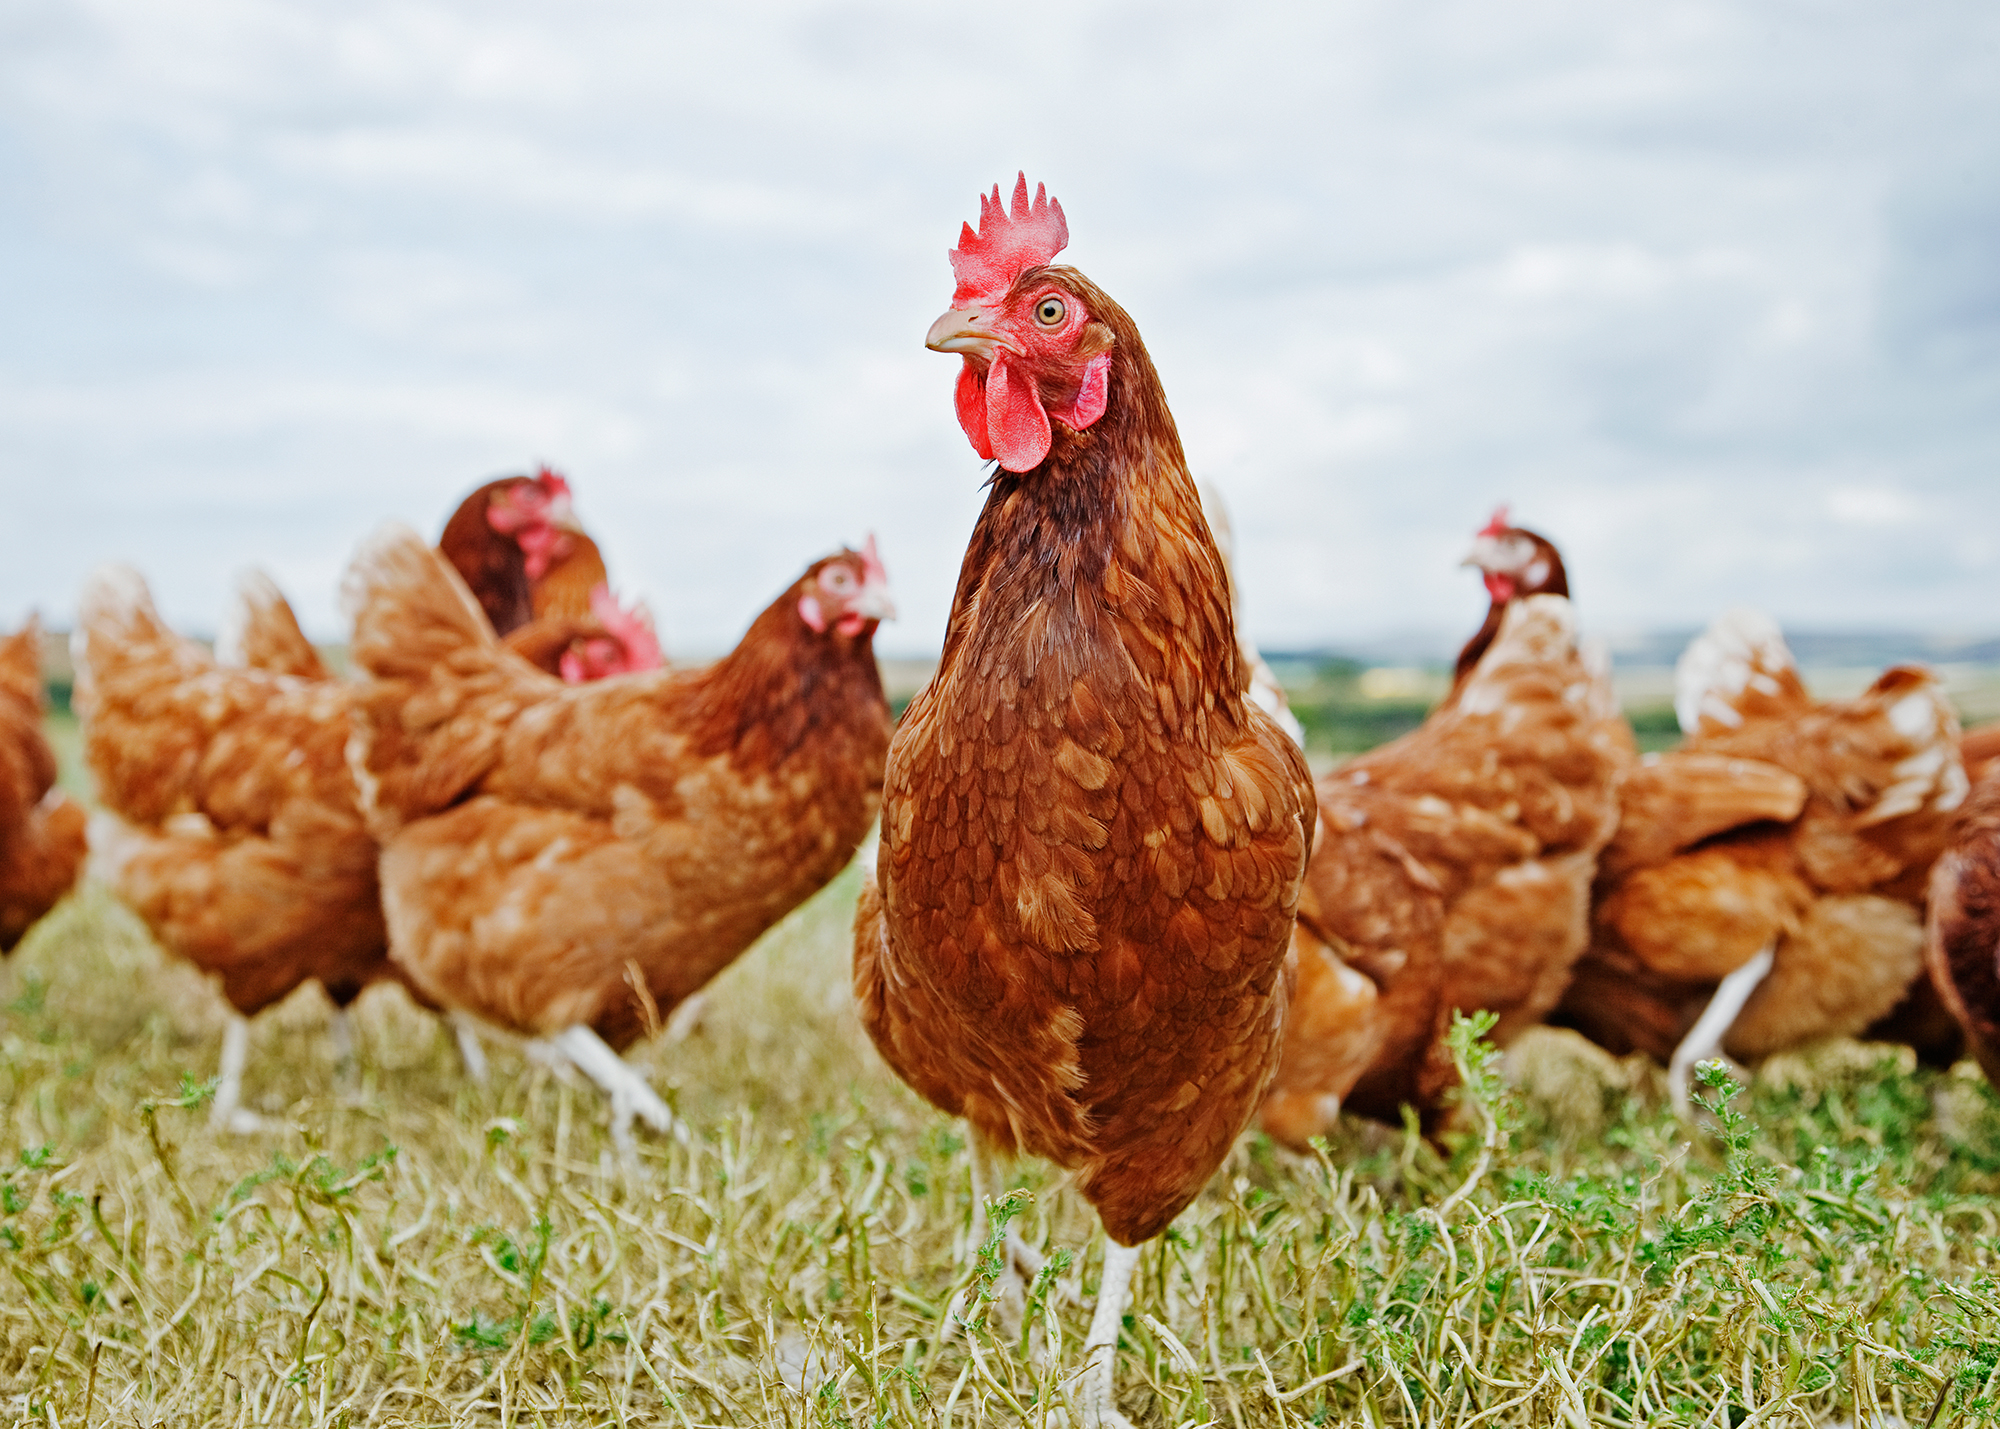 Compass’ move follows a summer of cage-free momentum